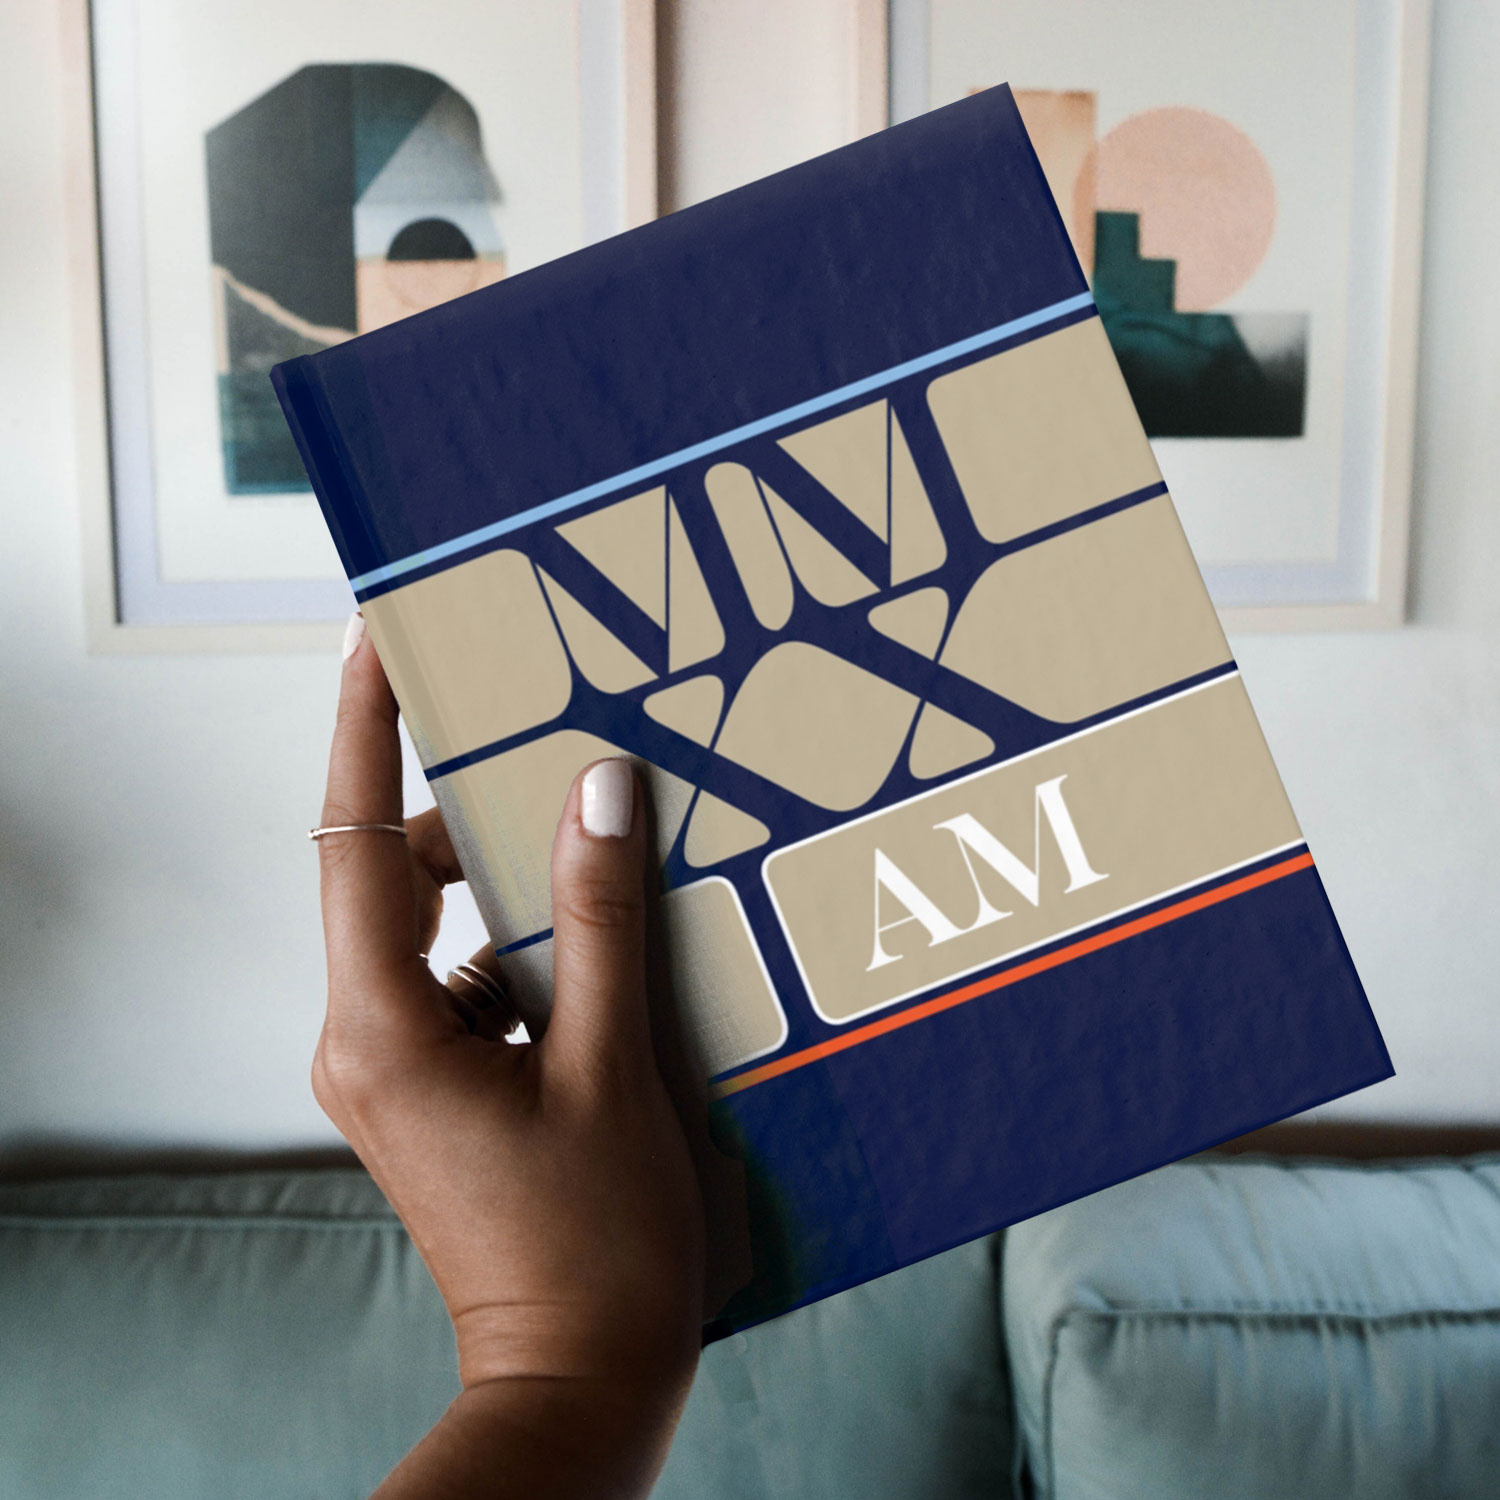 2021 (MMXXI): I Am – Blank or Lined Notebook